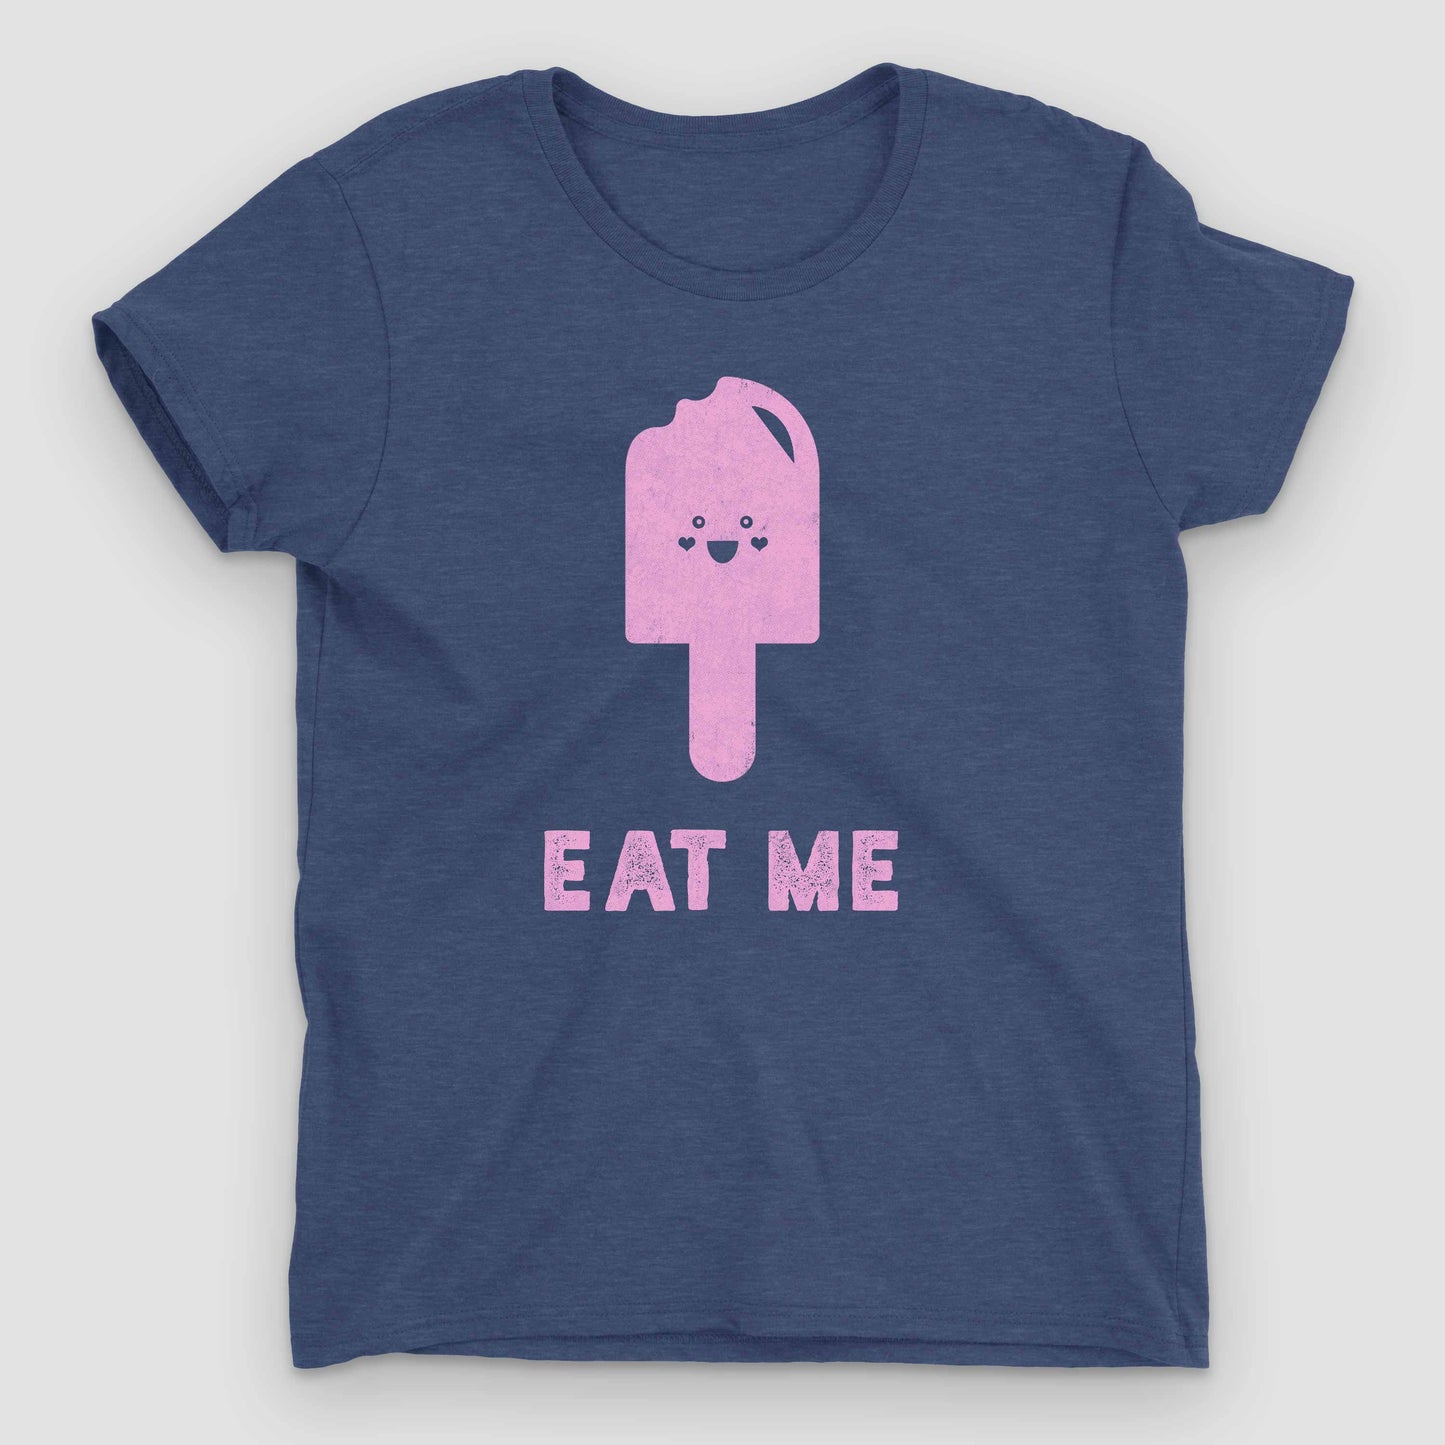 Heather Blue Eat Me Women's Graphic T-Shirt by Snaxtime